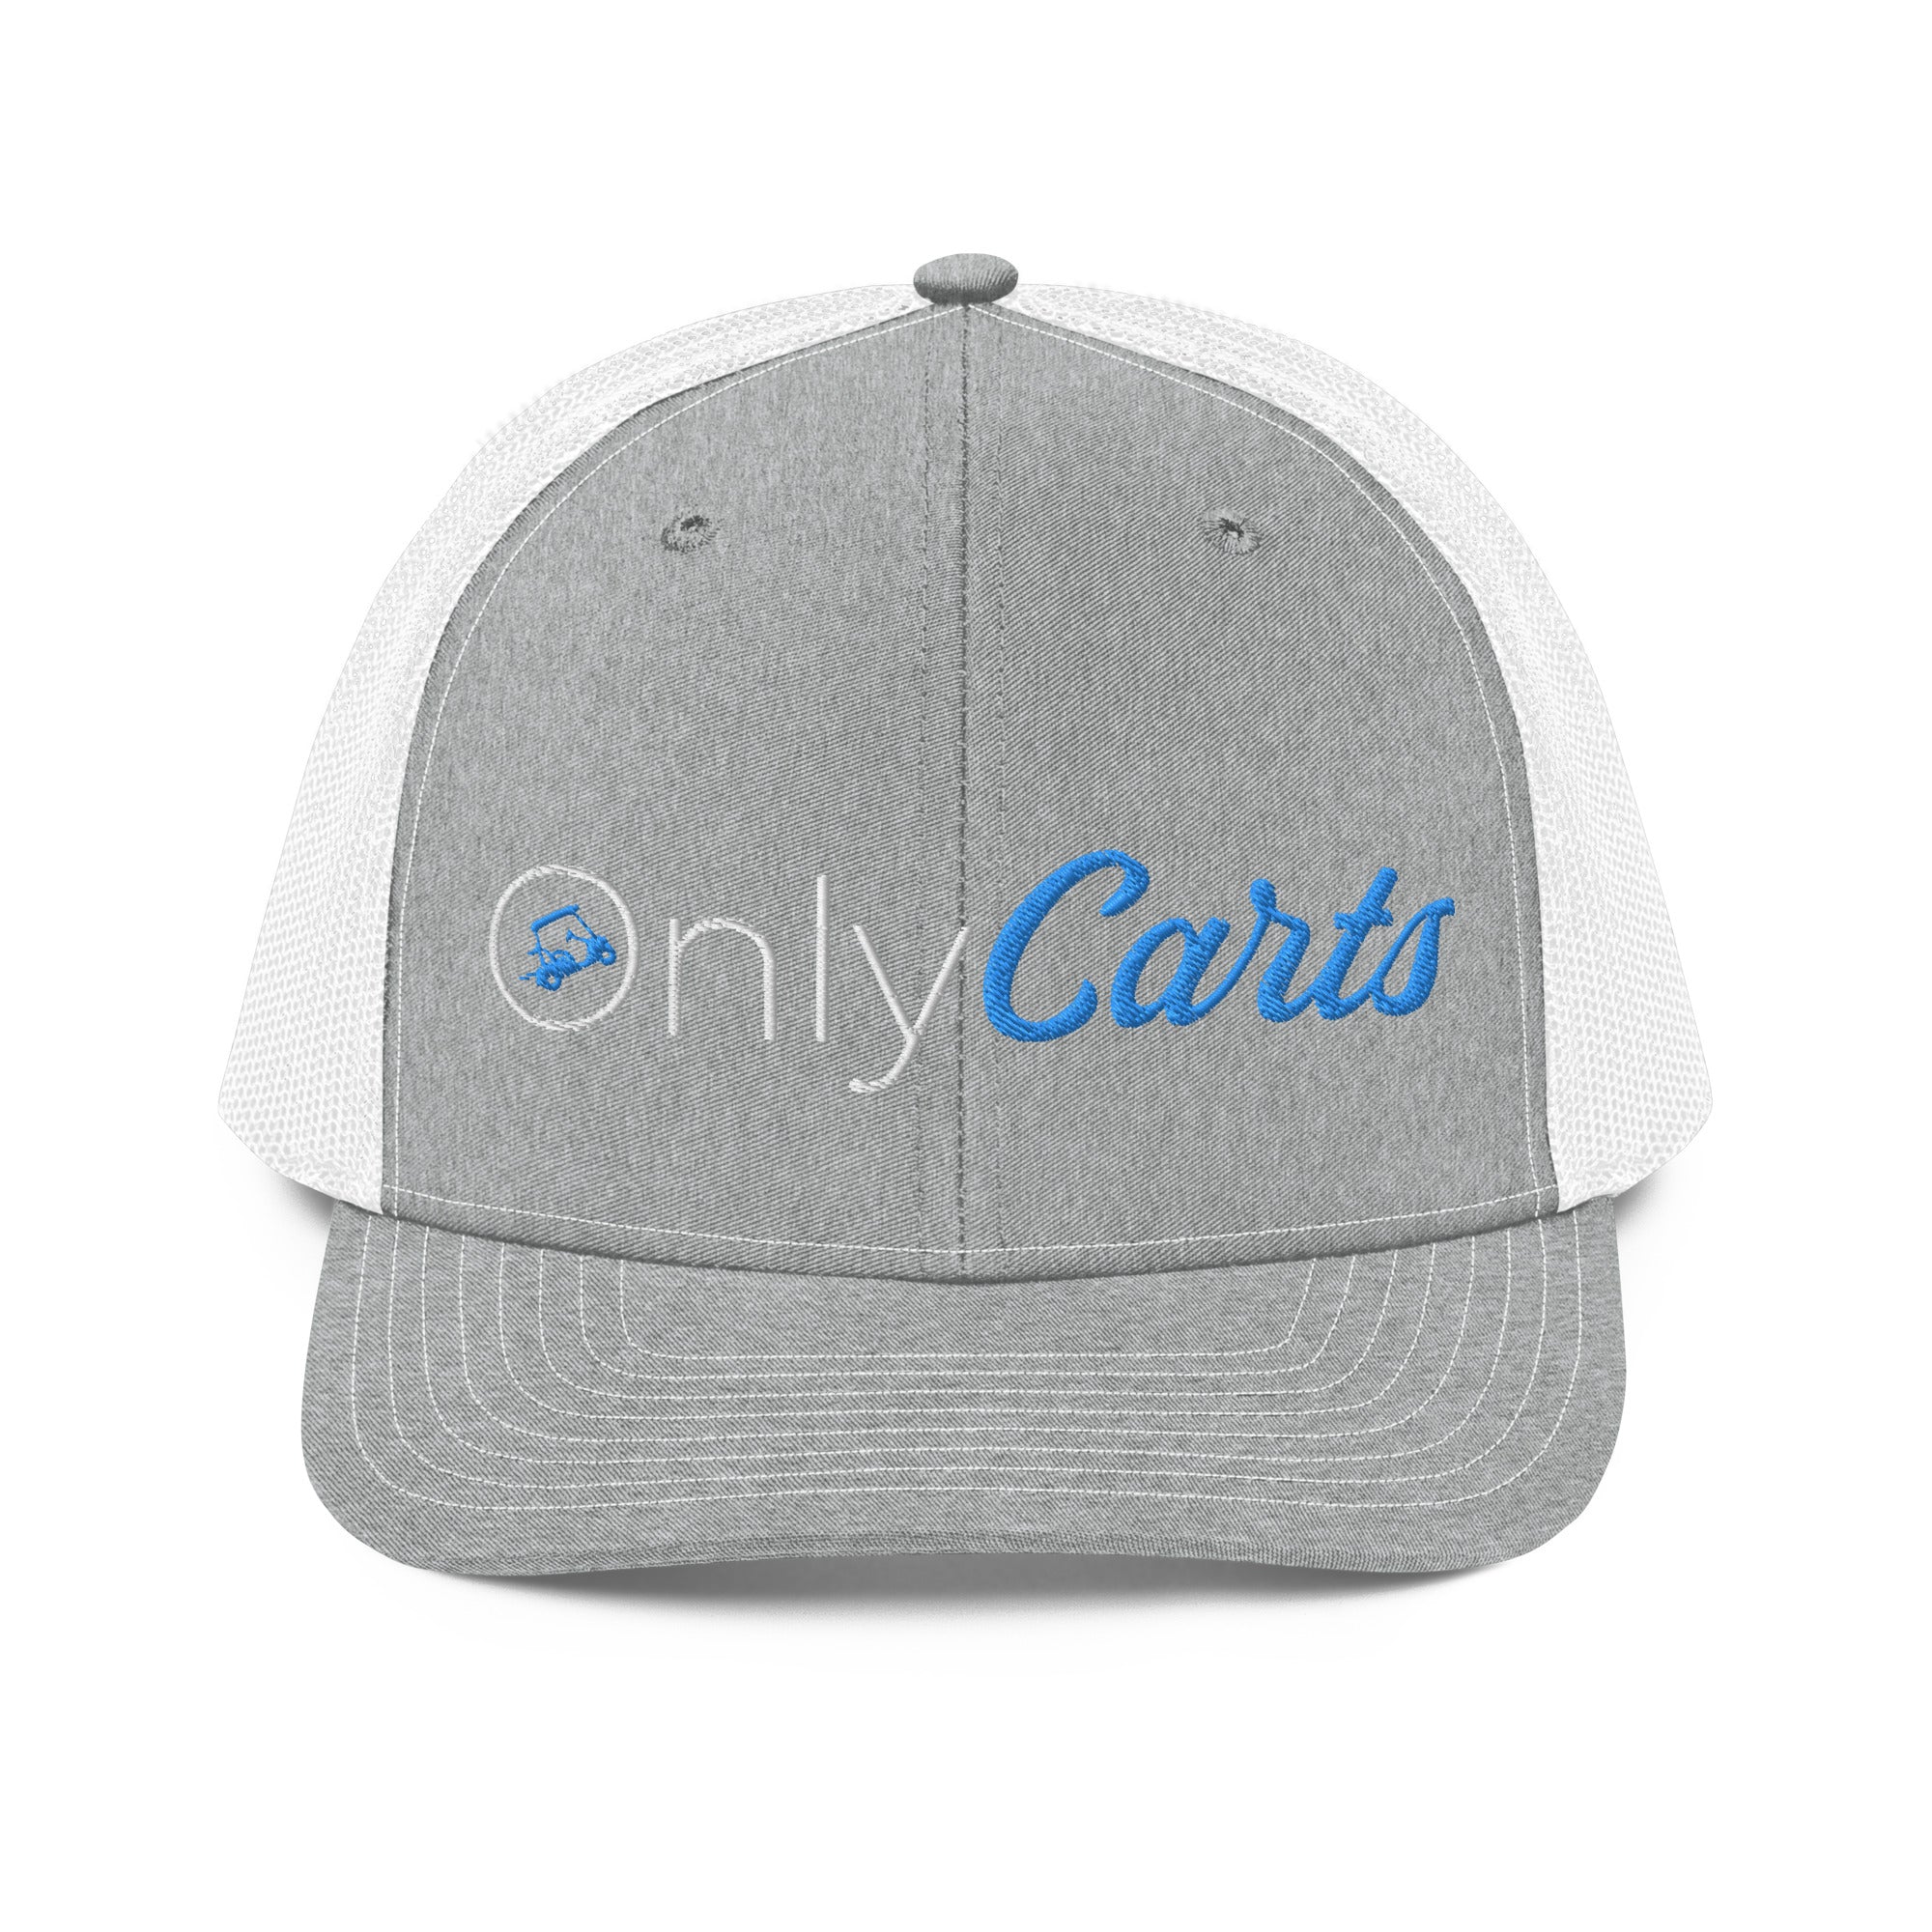 OnlyCarts Trucker logo hat by Golf Carts Modified